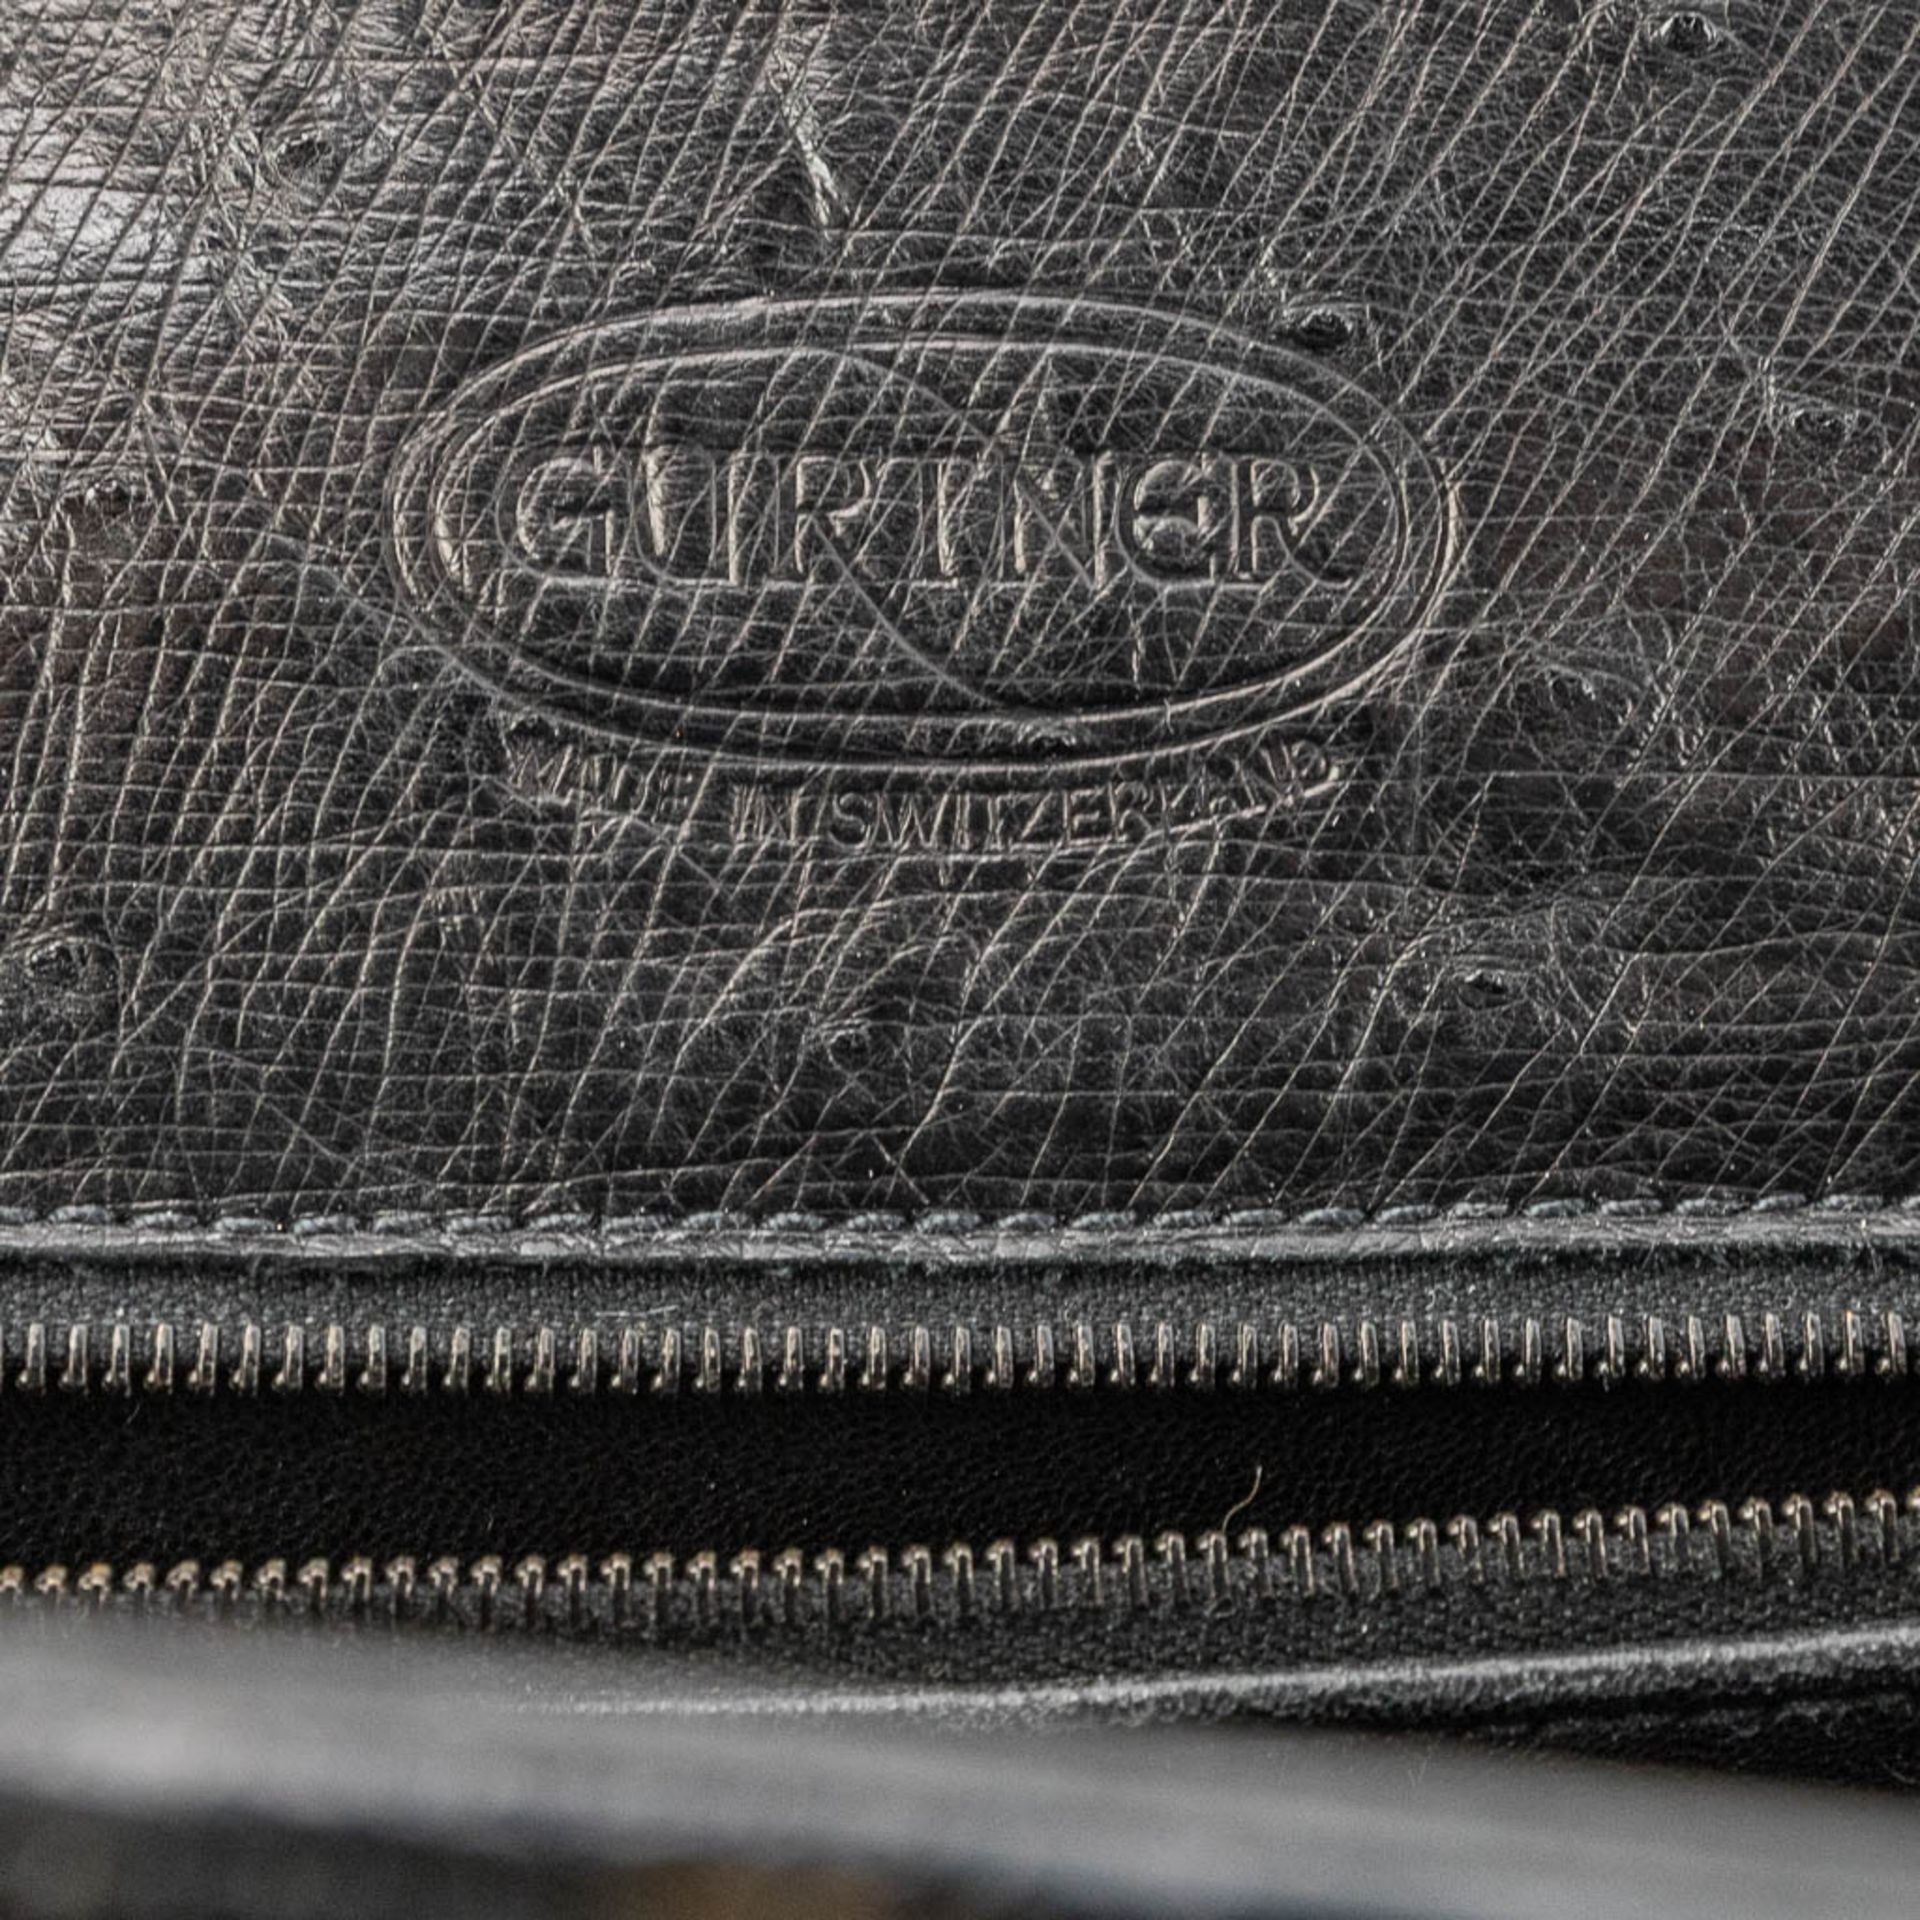 A handbag made of black ostrich leather and made by Olivier Gurtner in Switzerland. (H:28cm) - Image 9 of 17